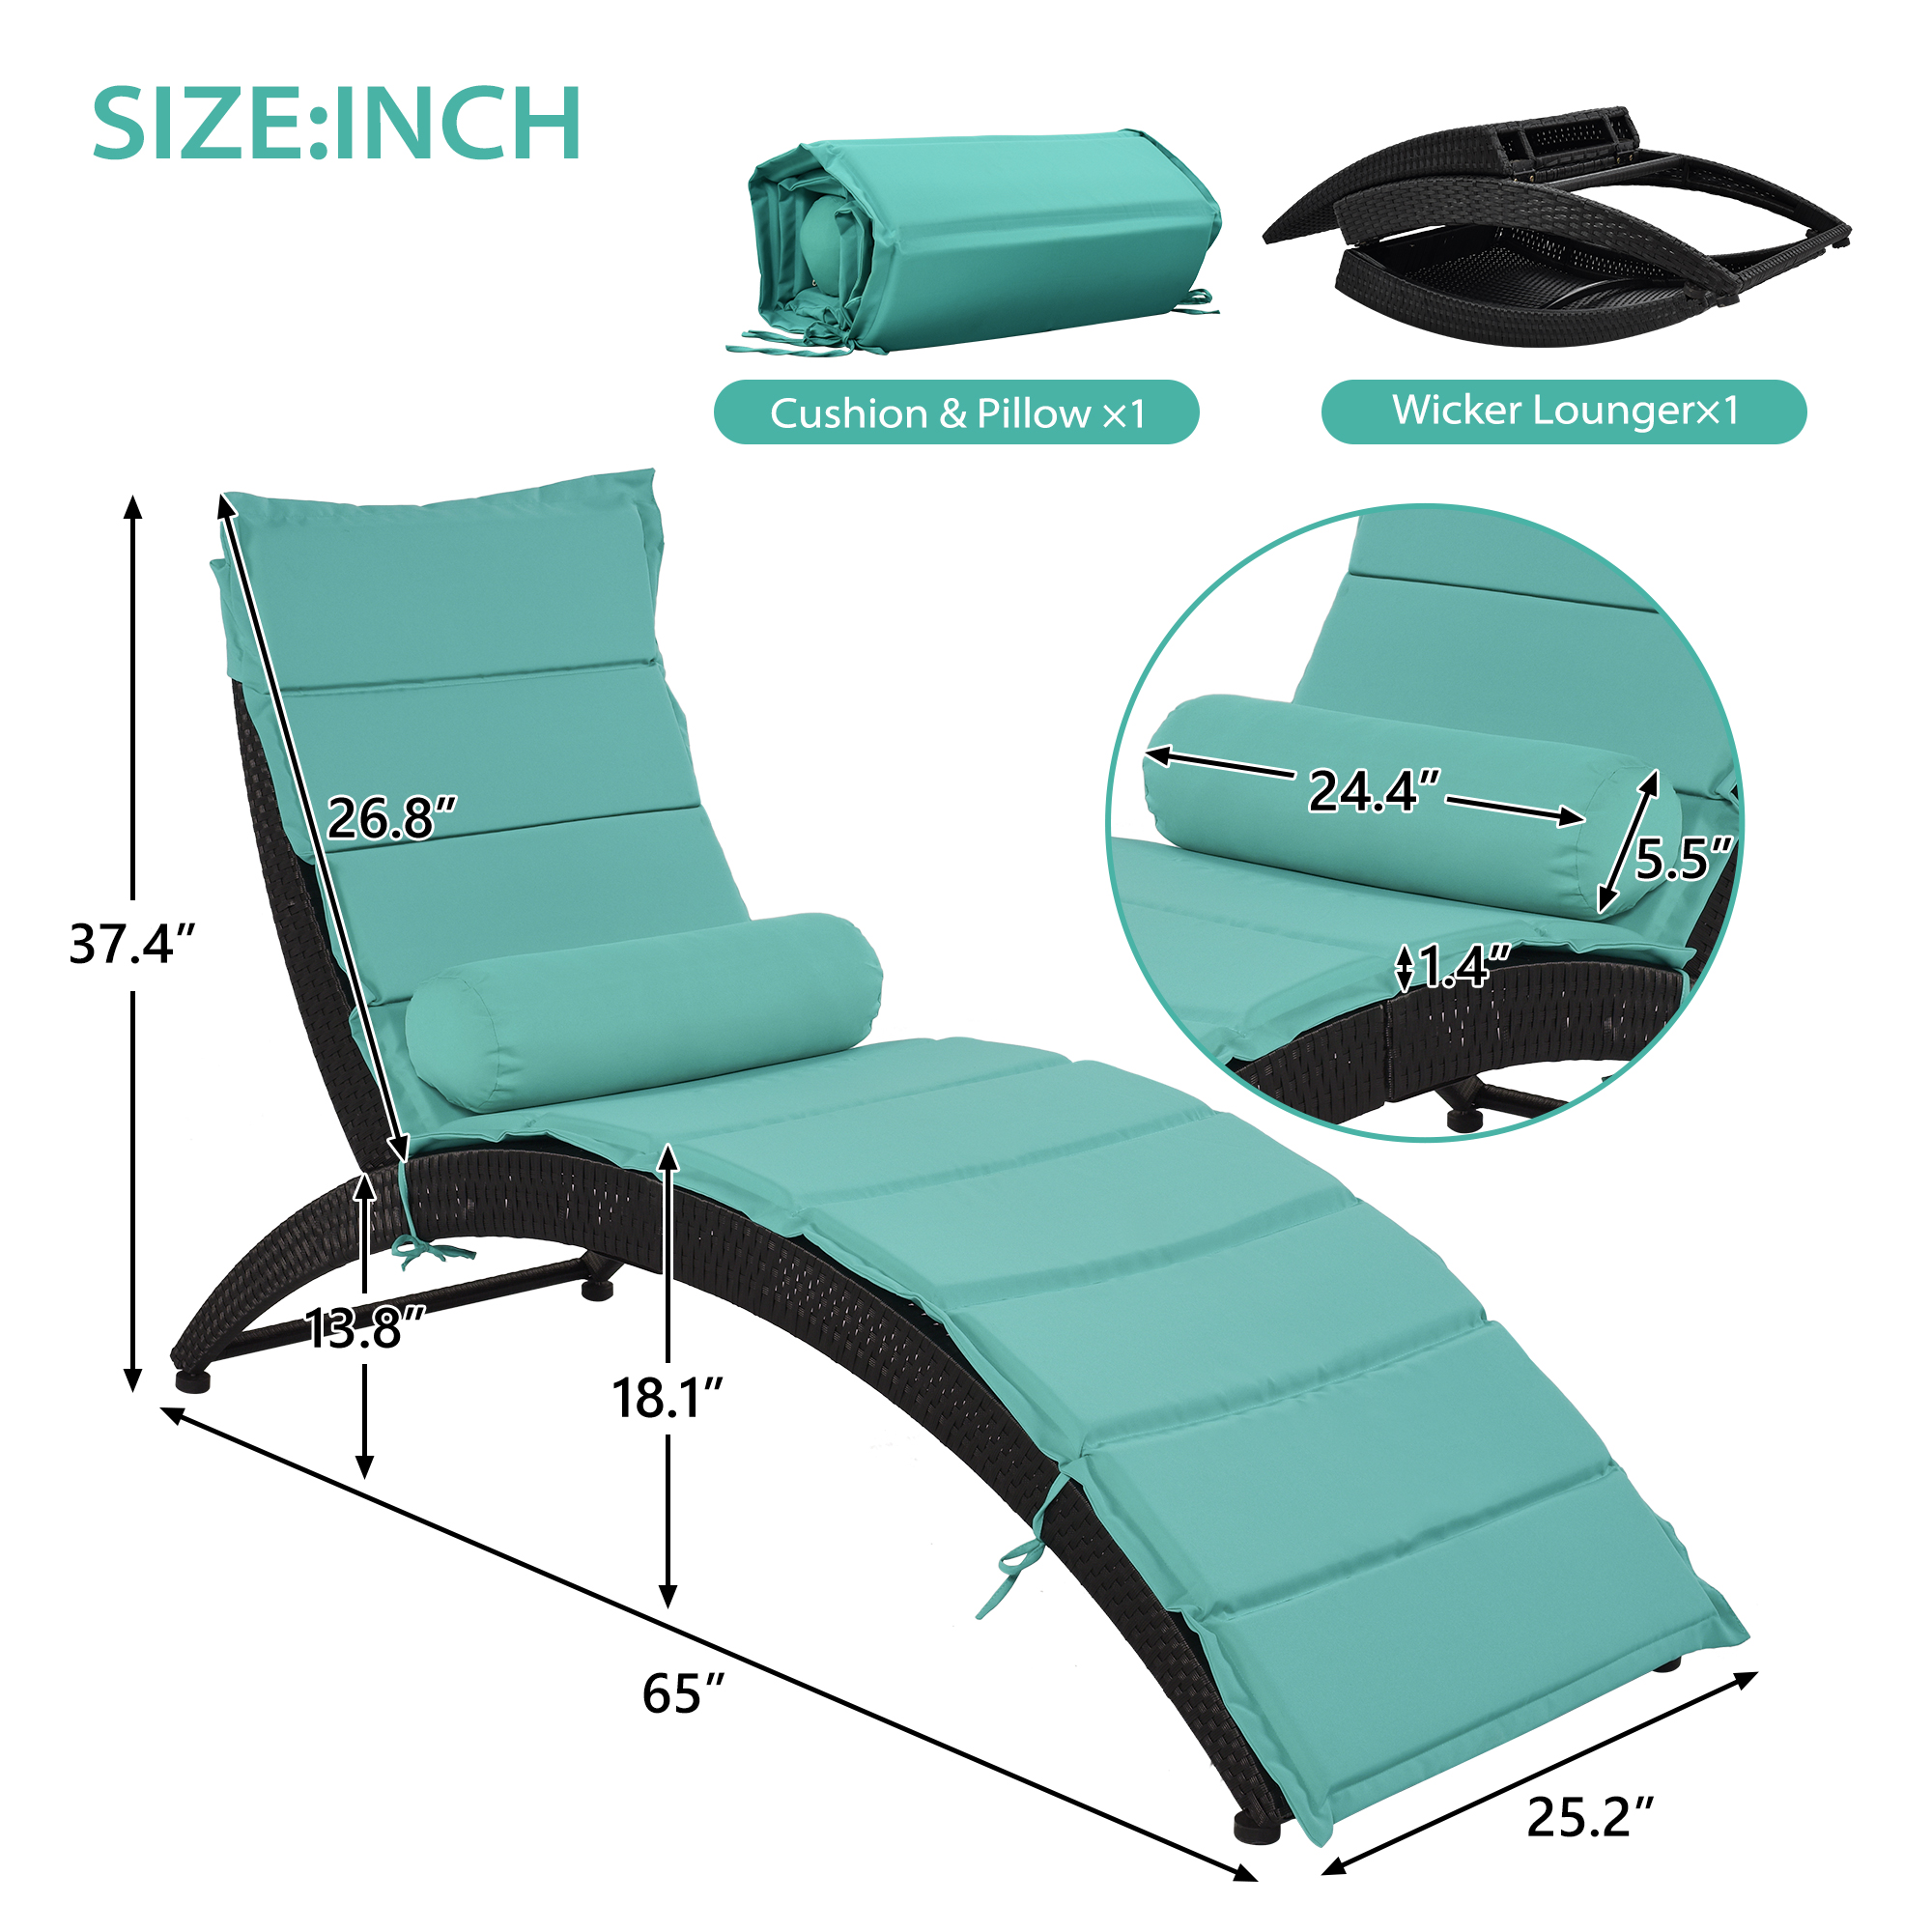 Lounge Chair Outdoor, Foldable Outdoor Chaise Lounge, Patio Wicker Sun Lounger with Removable Cushion and Bolster Pillow for Poolside Deck Porch Garden, 1 Set, Blue - image 4 of 12